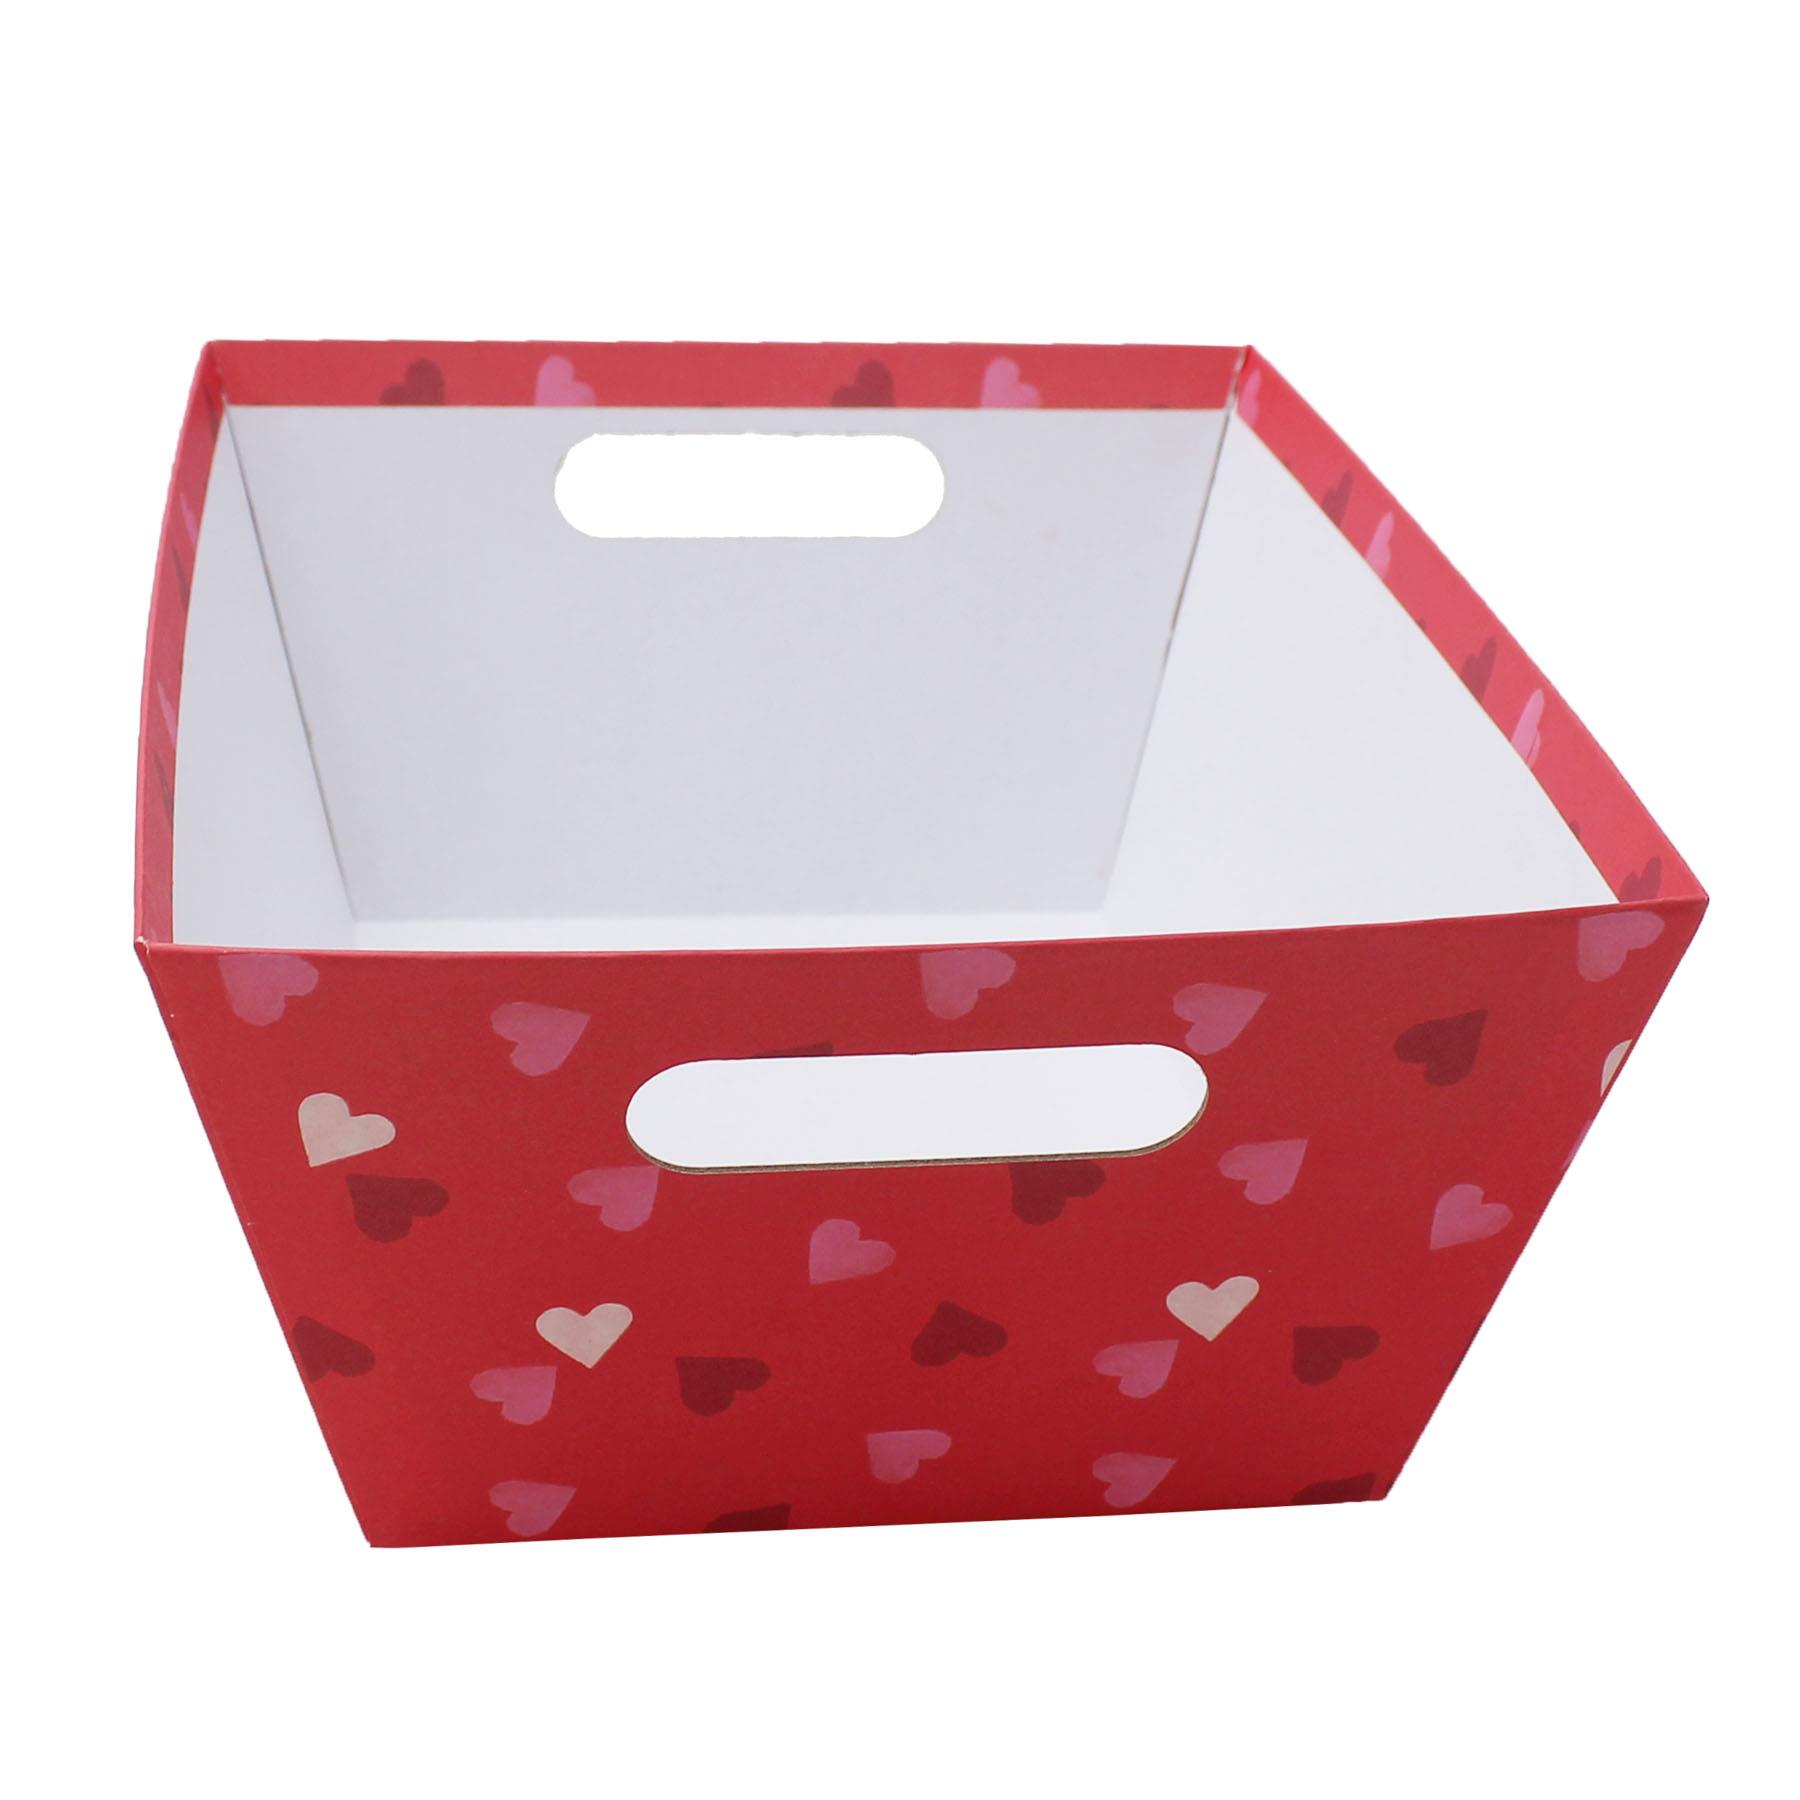 Valentines Hamper Gift Box 30cm x 14cm Red with Hearts